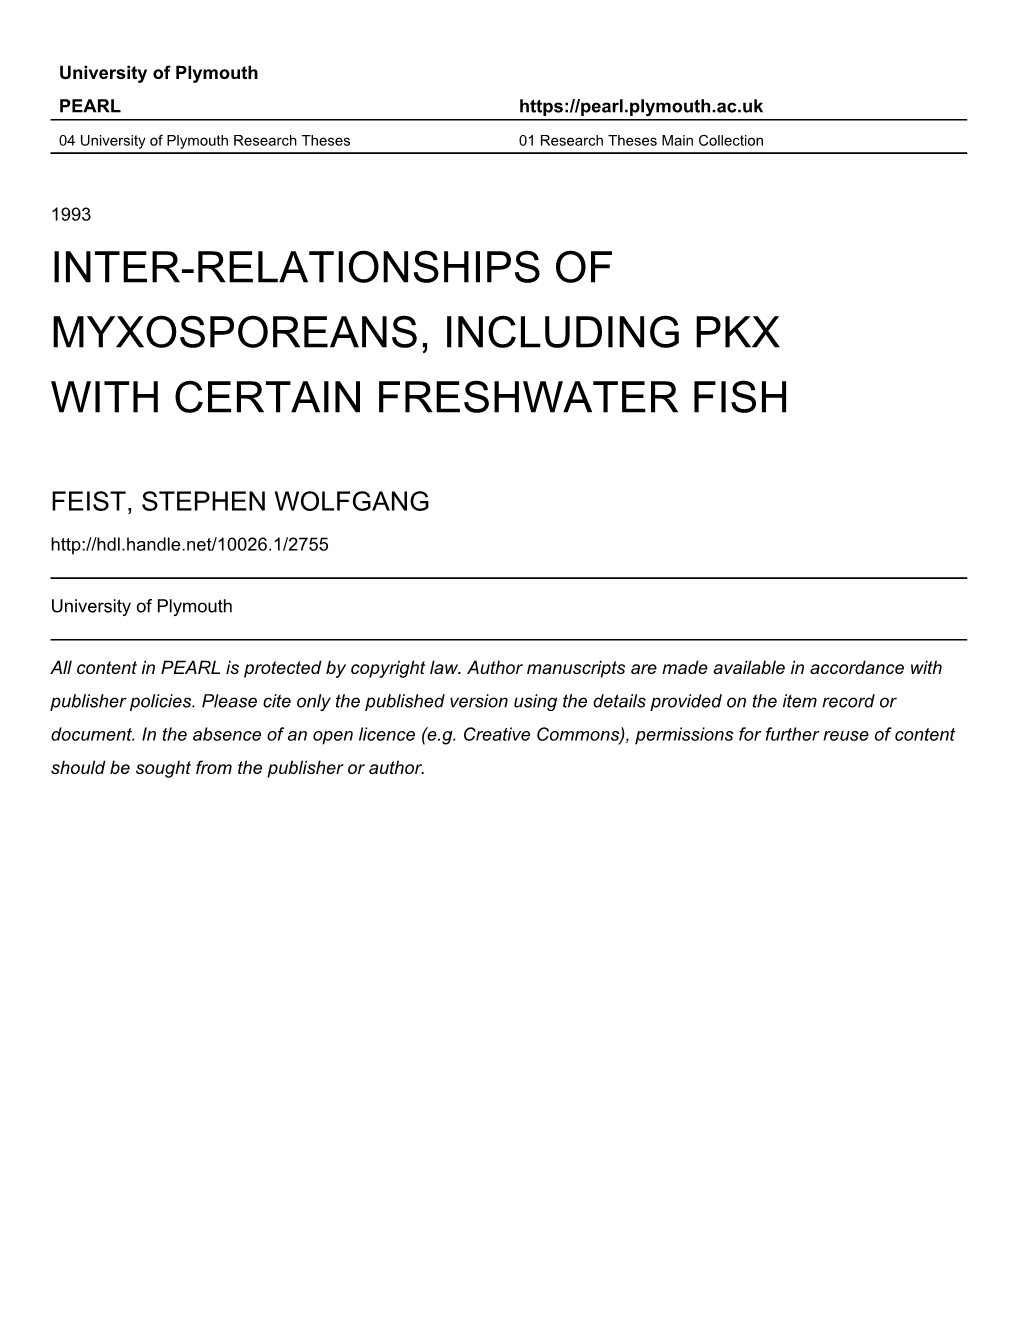 Inter-Relationships of Myxosporeans, Including Pkx with Certain Freshwater Fish